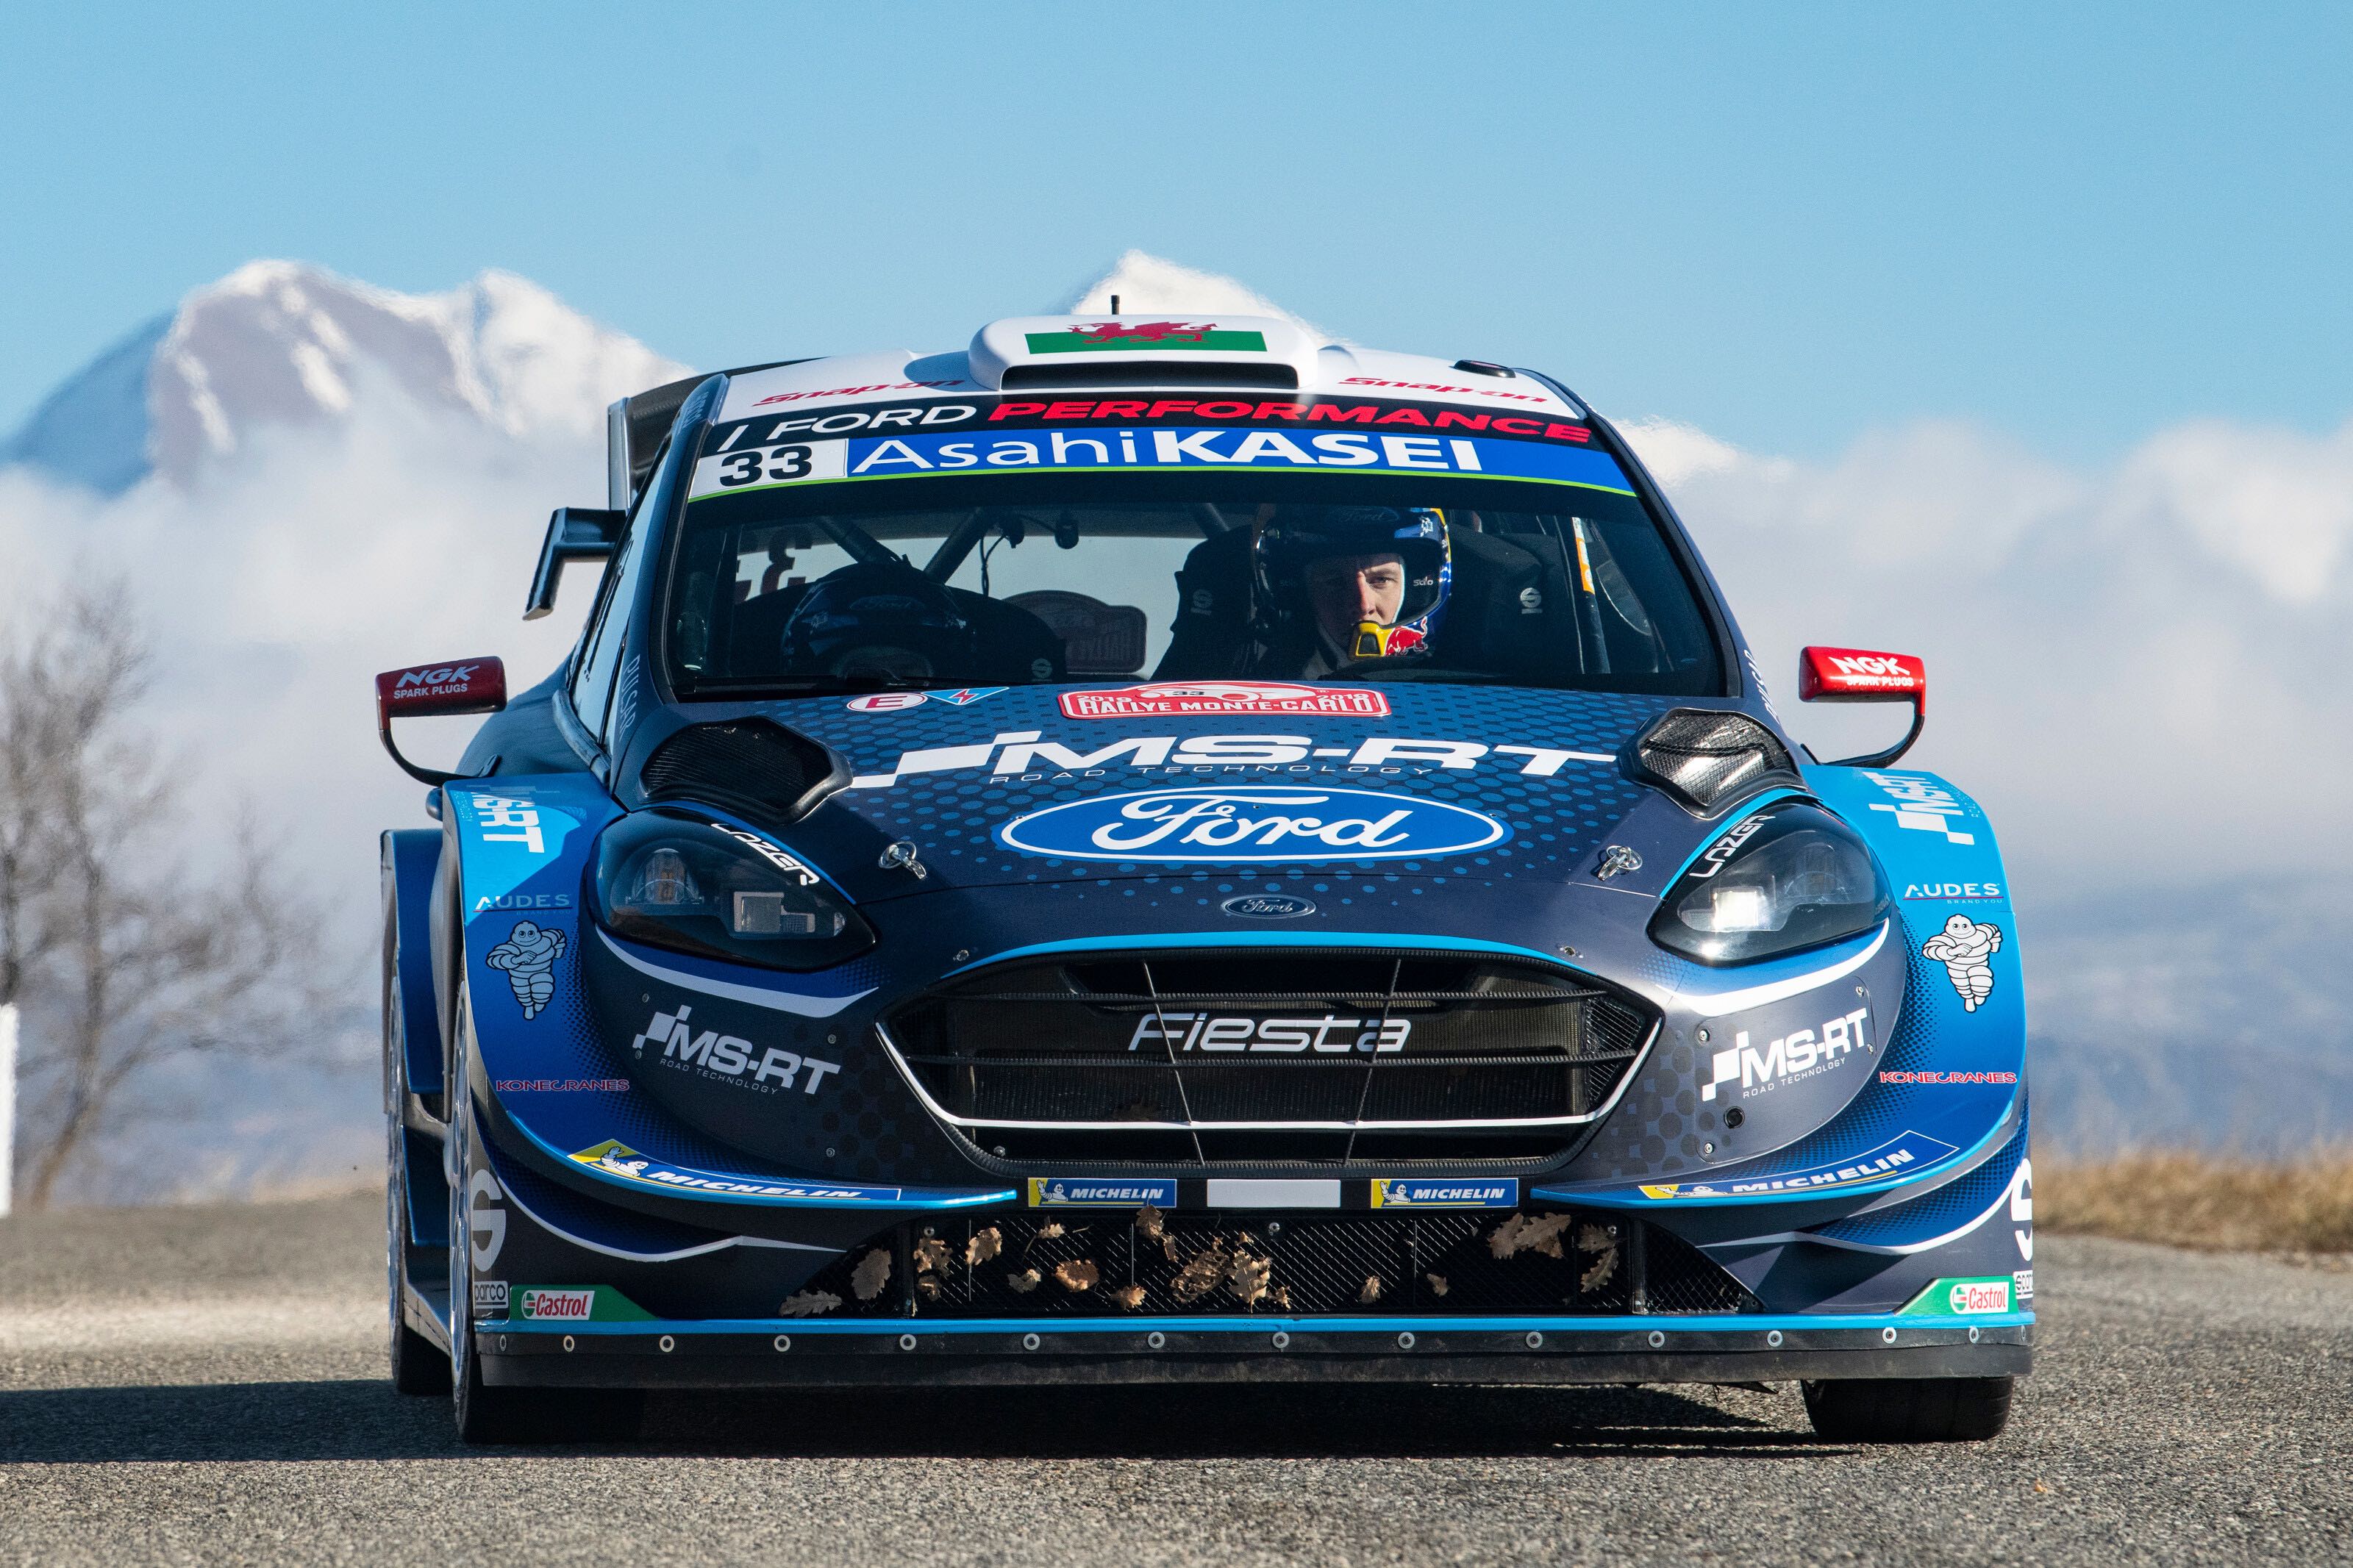 Evans Crashes Out After Mighty Monte Performance